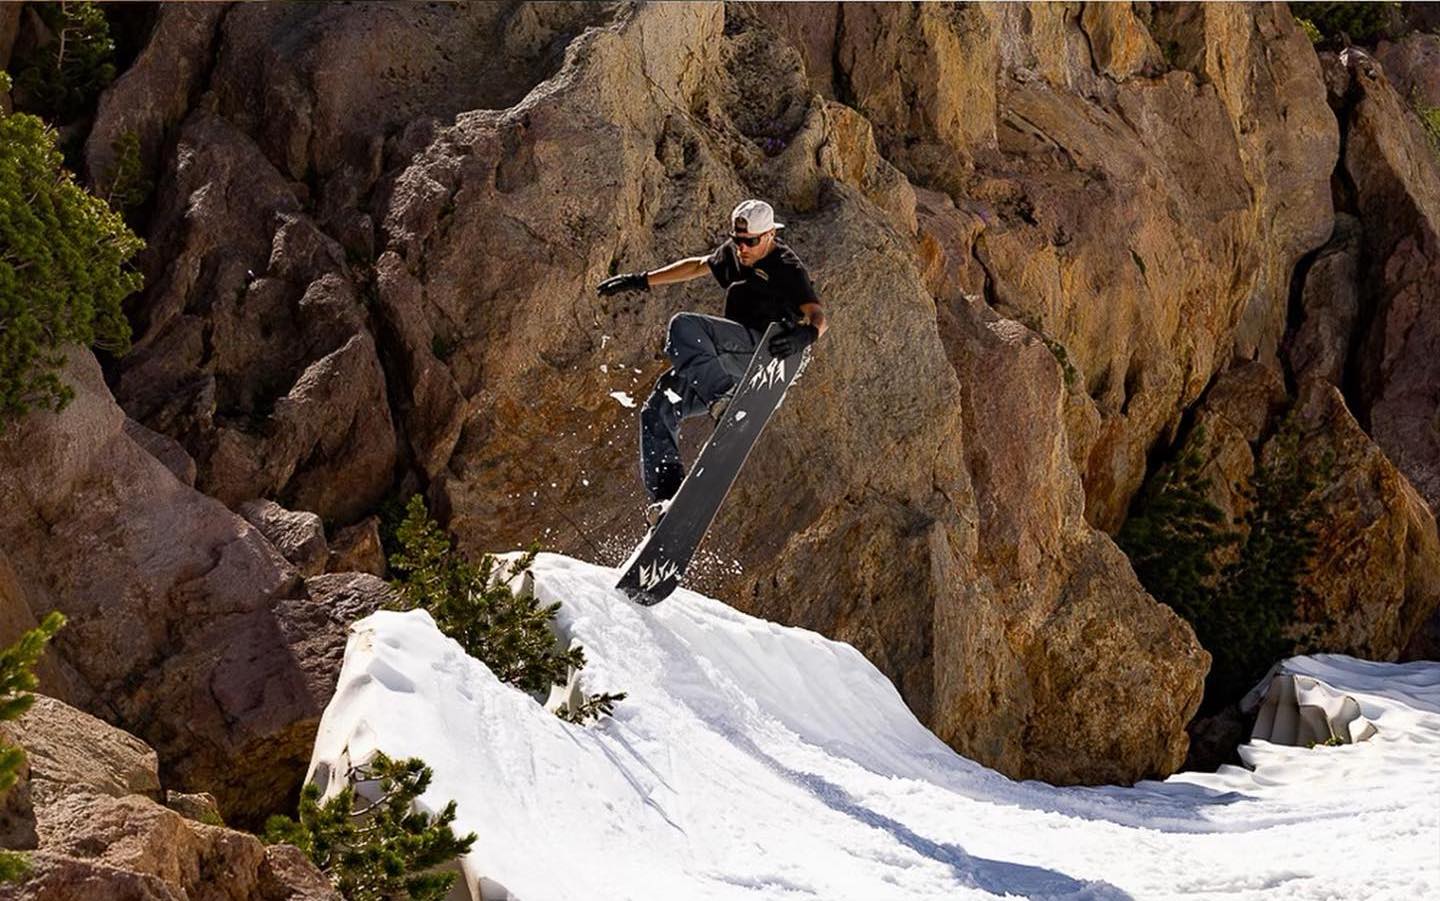 A snowboarder takes air on a side hit, grabbing nose. There's reddish coloured rock behind, with just a little snow to jump, and the rider wears a t shirt suggesting it's definitely spring summer skiing